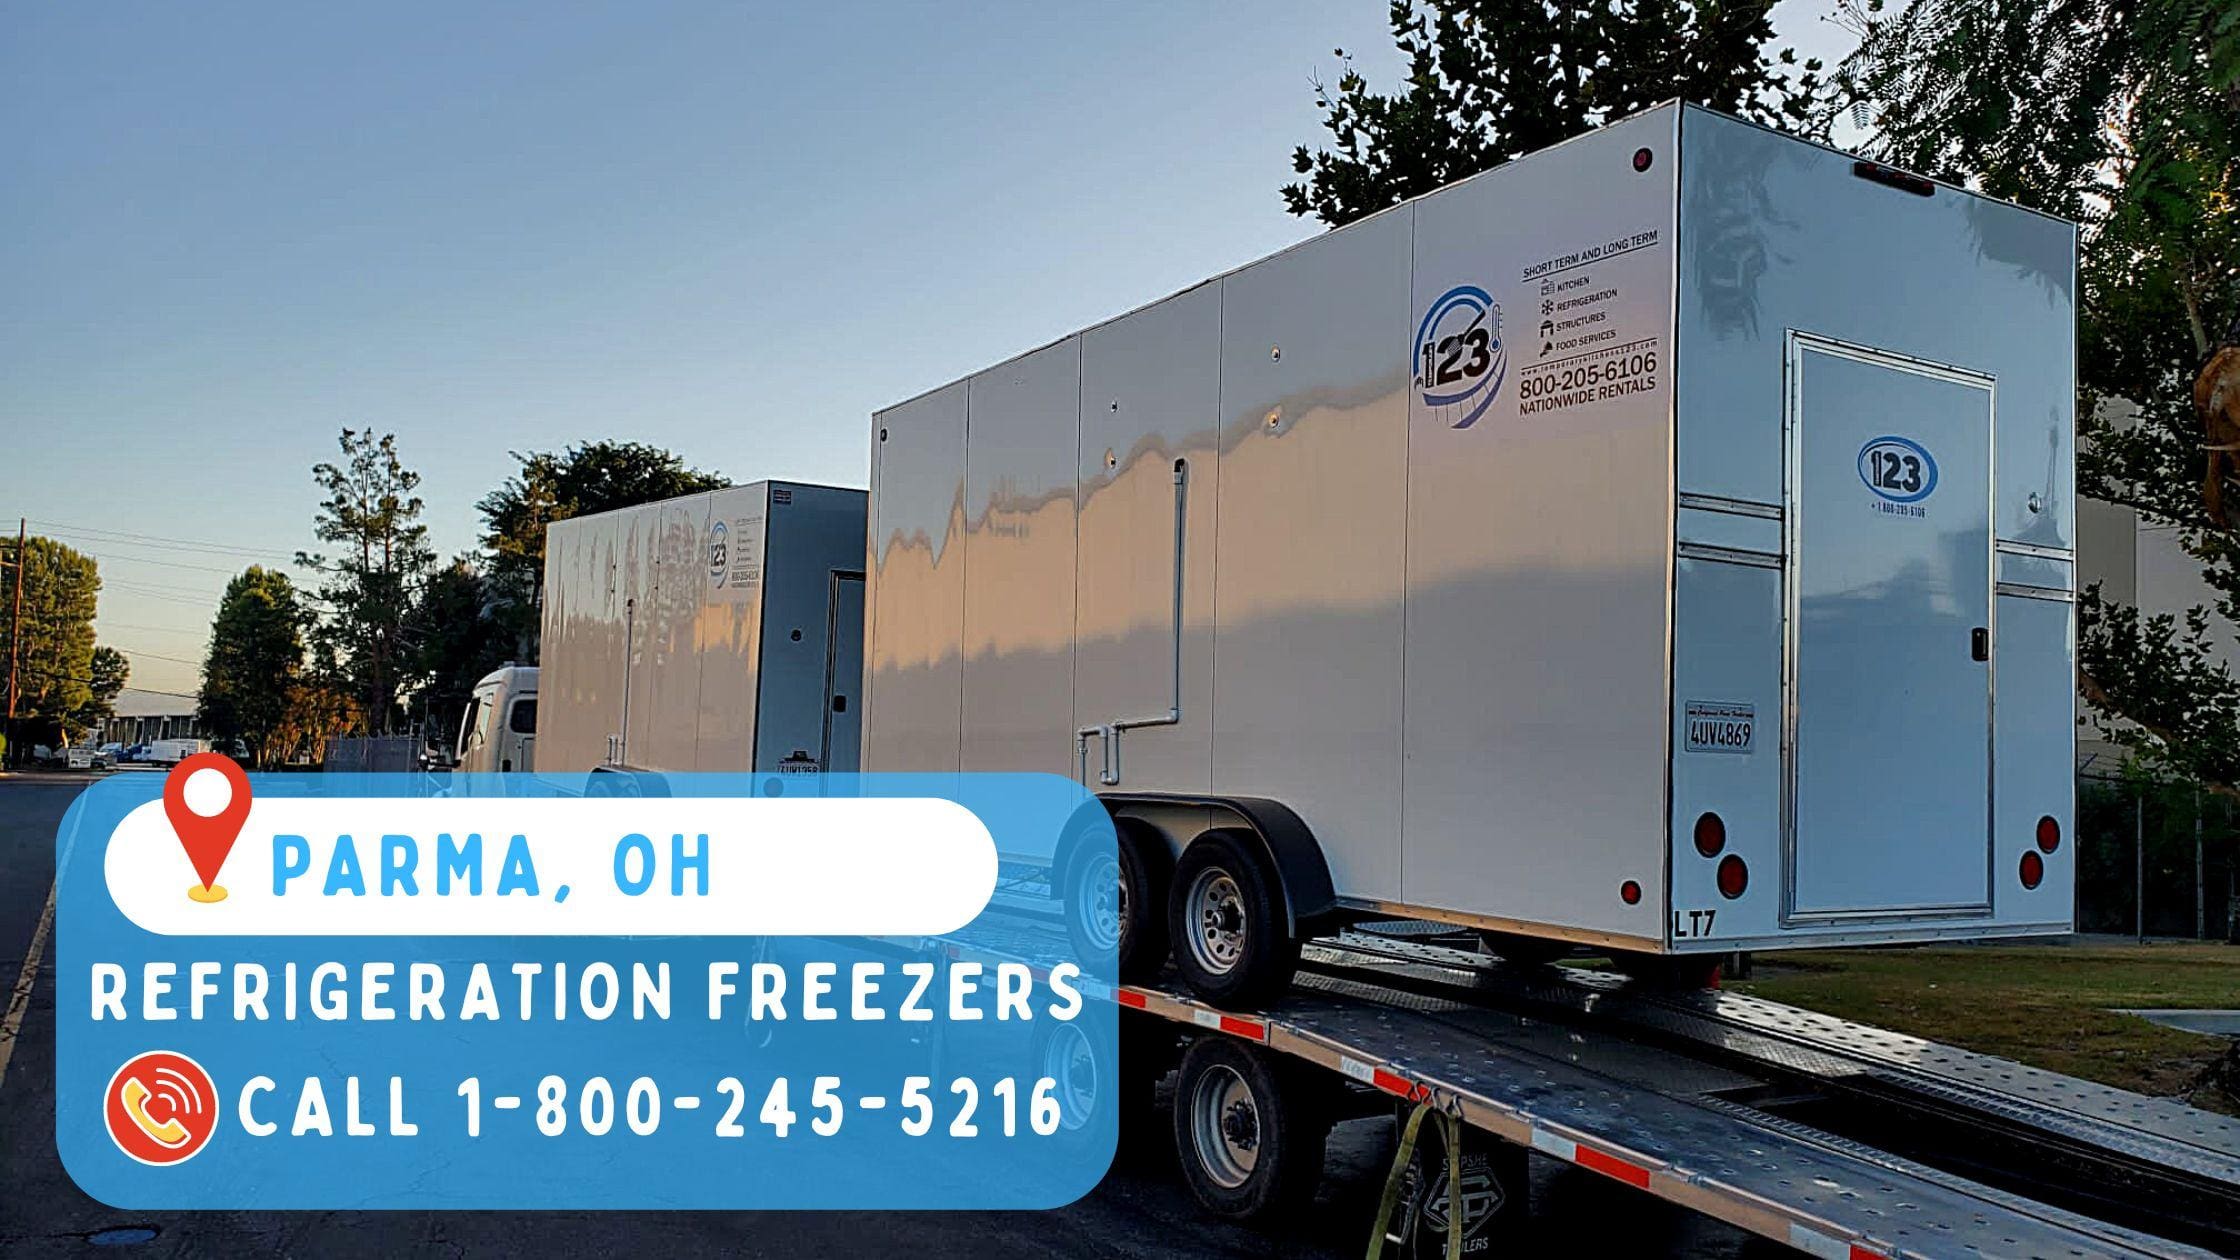 Refrigeration Freezers in Parma, OH